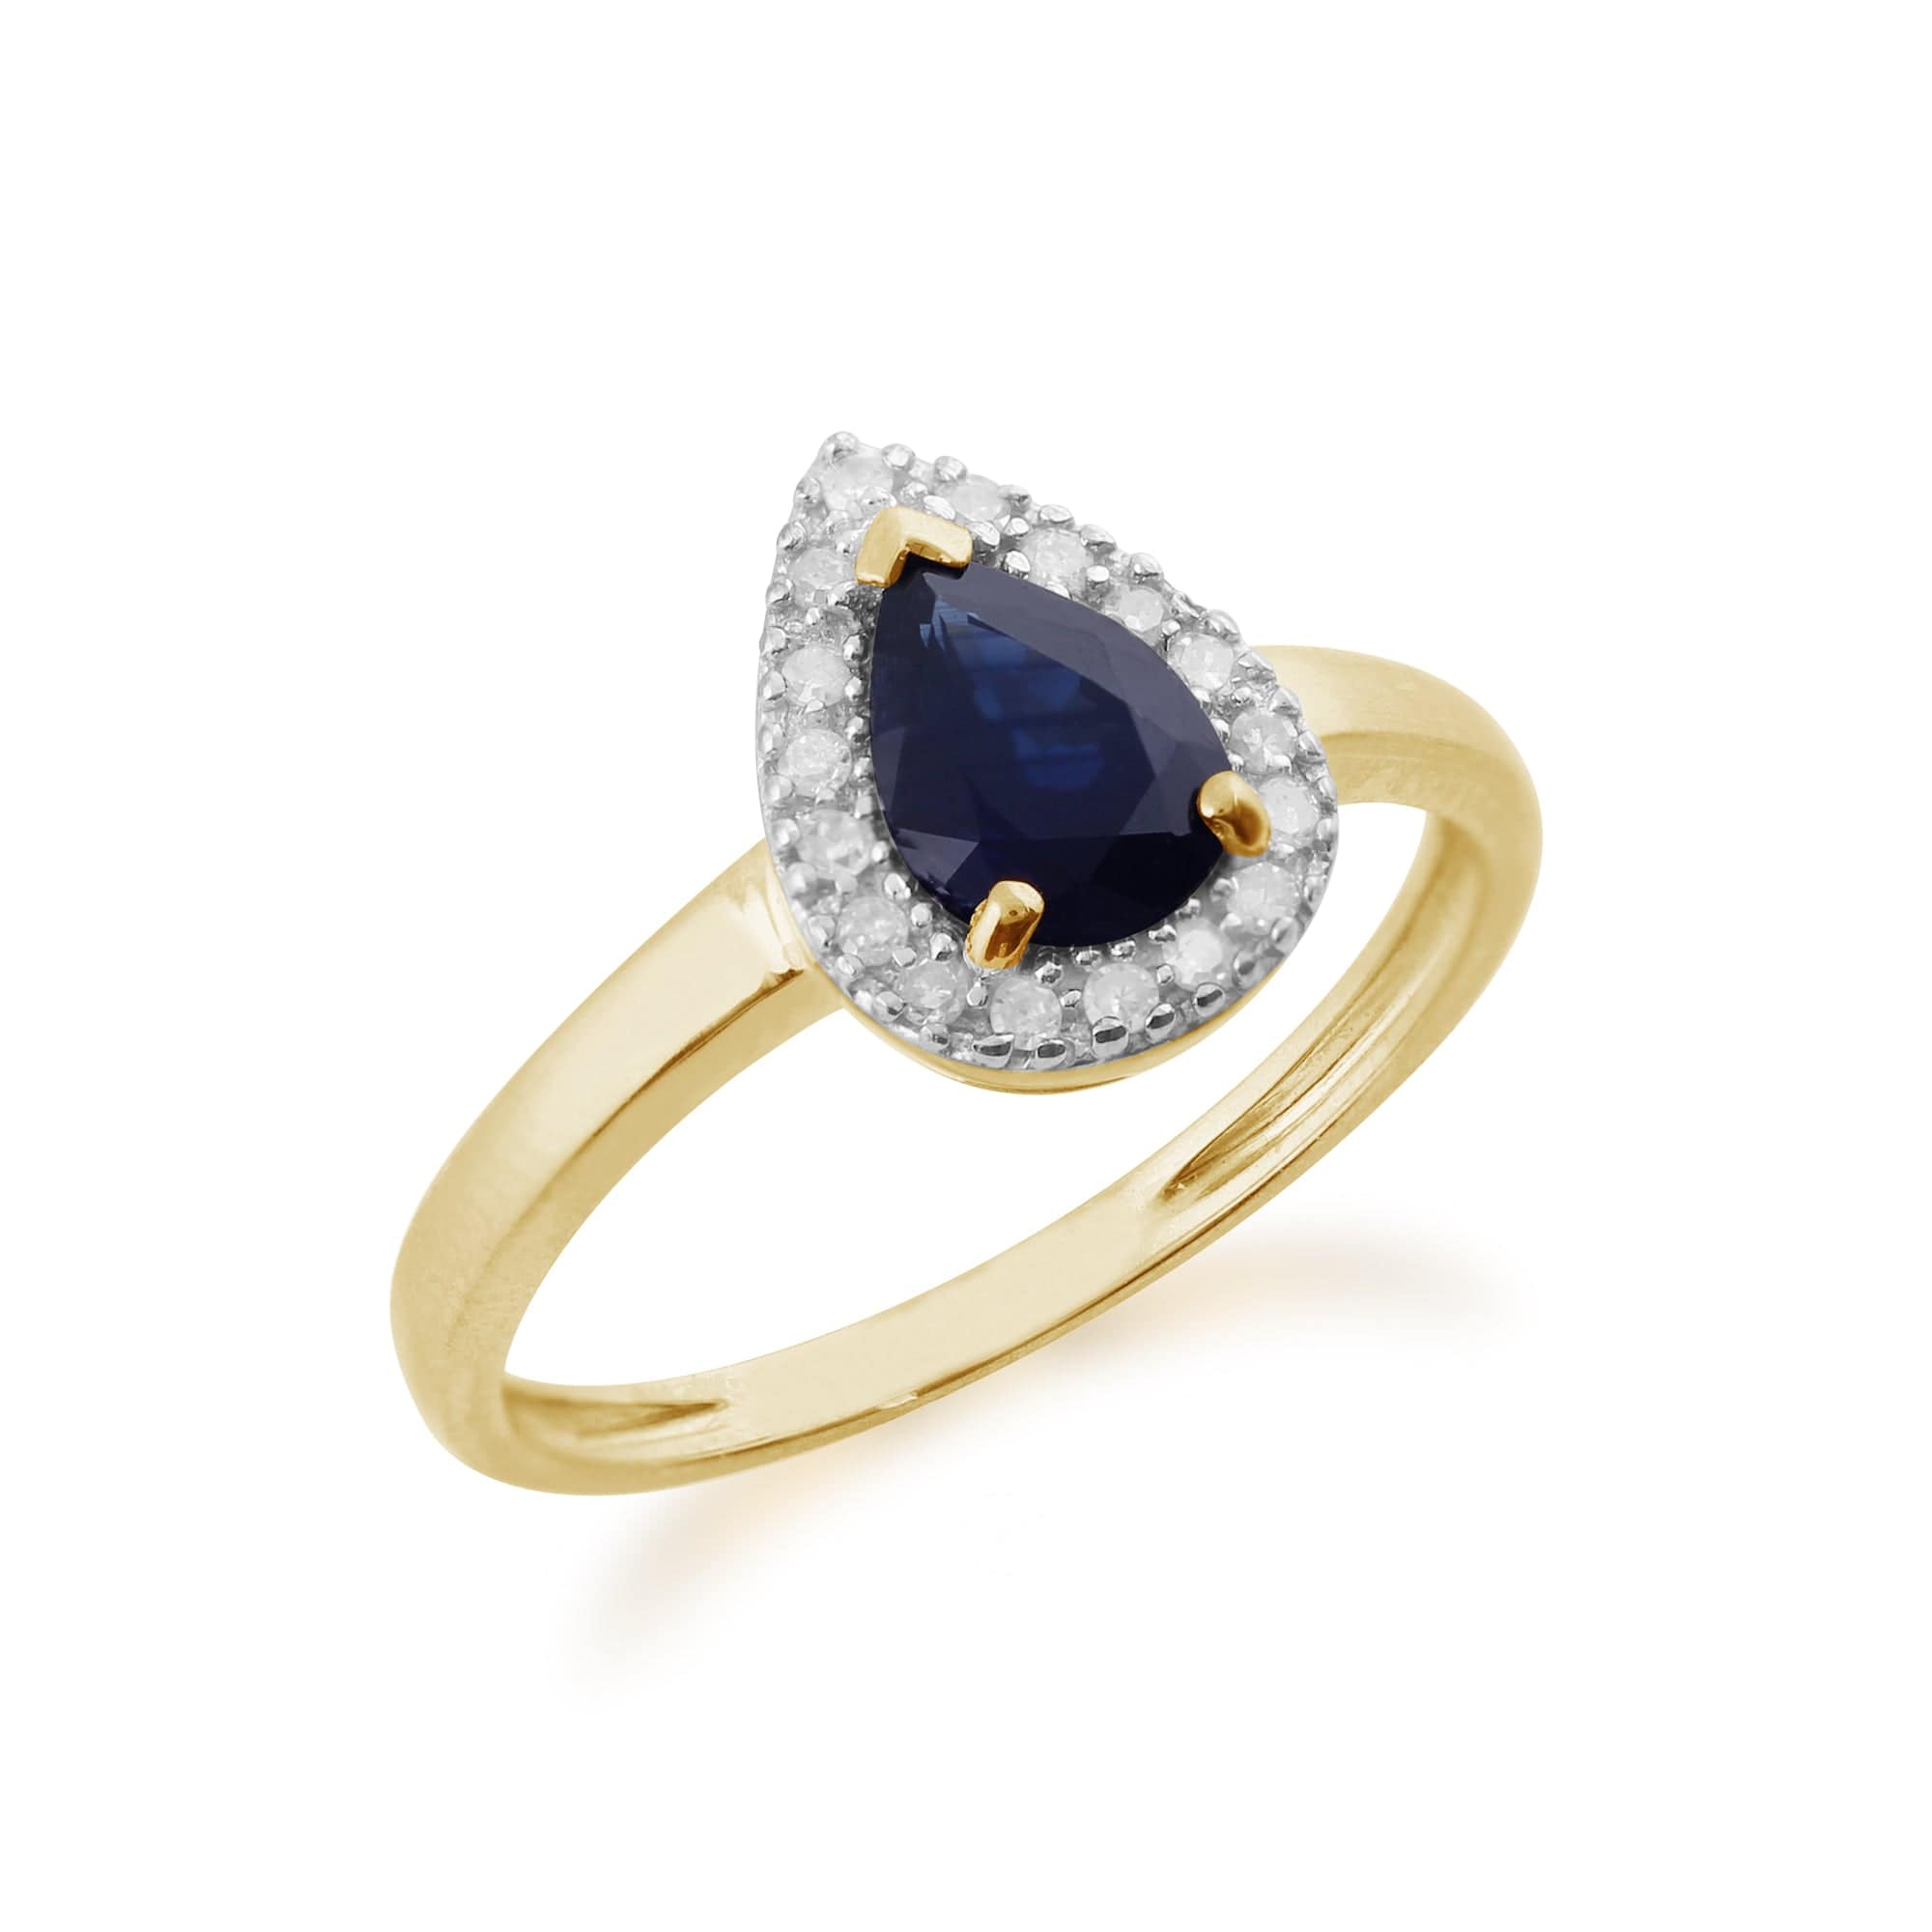 22616 Classic Pear Shaped Sapphire & Diamond Ring in Yellow 9ct Gold 2